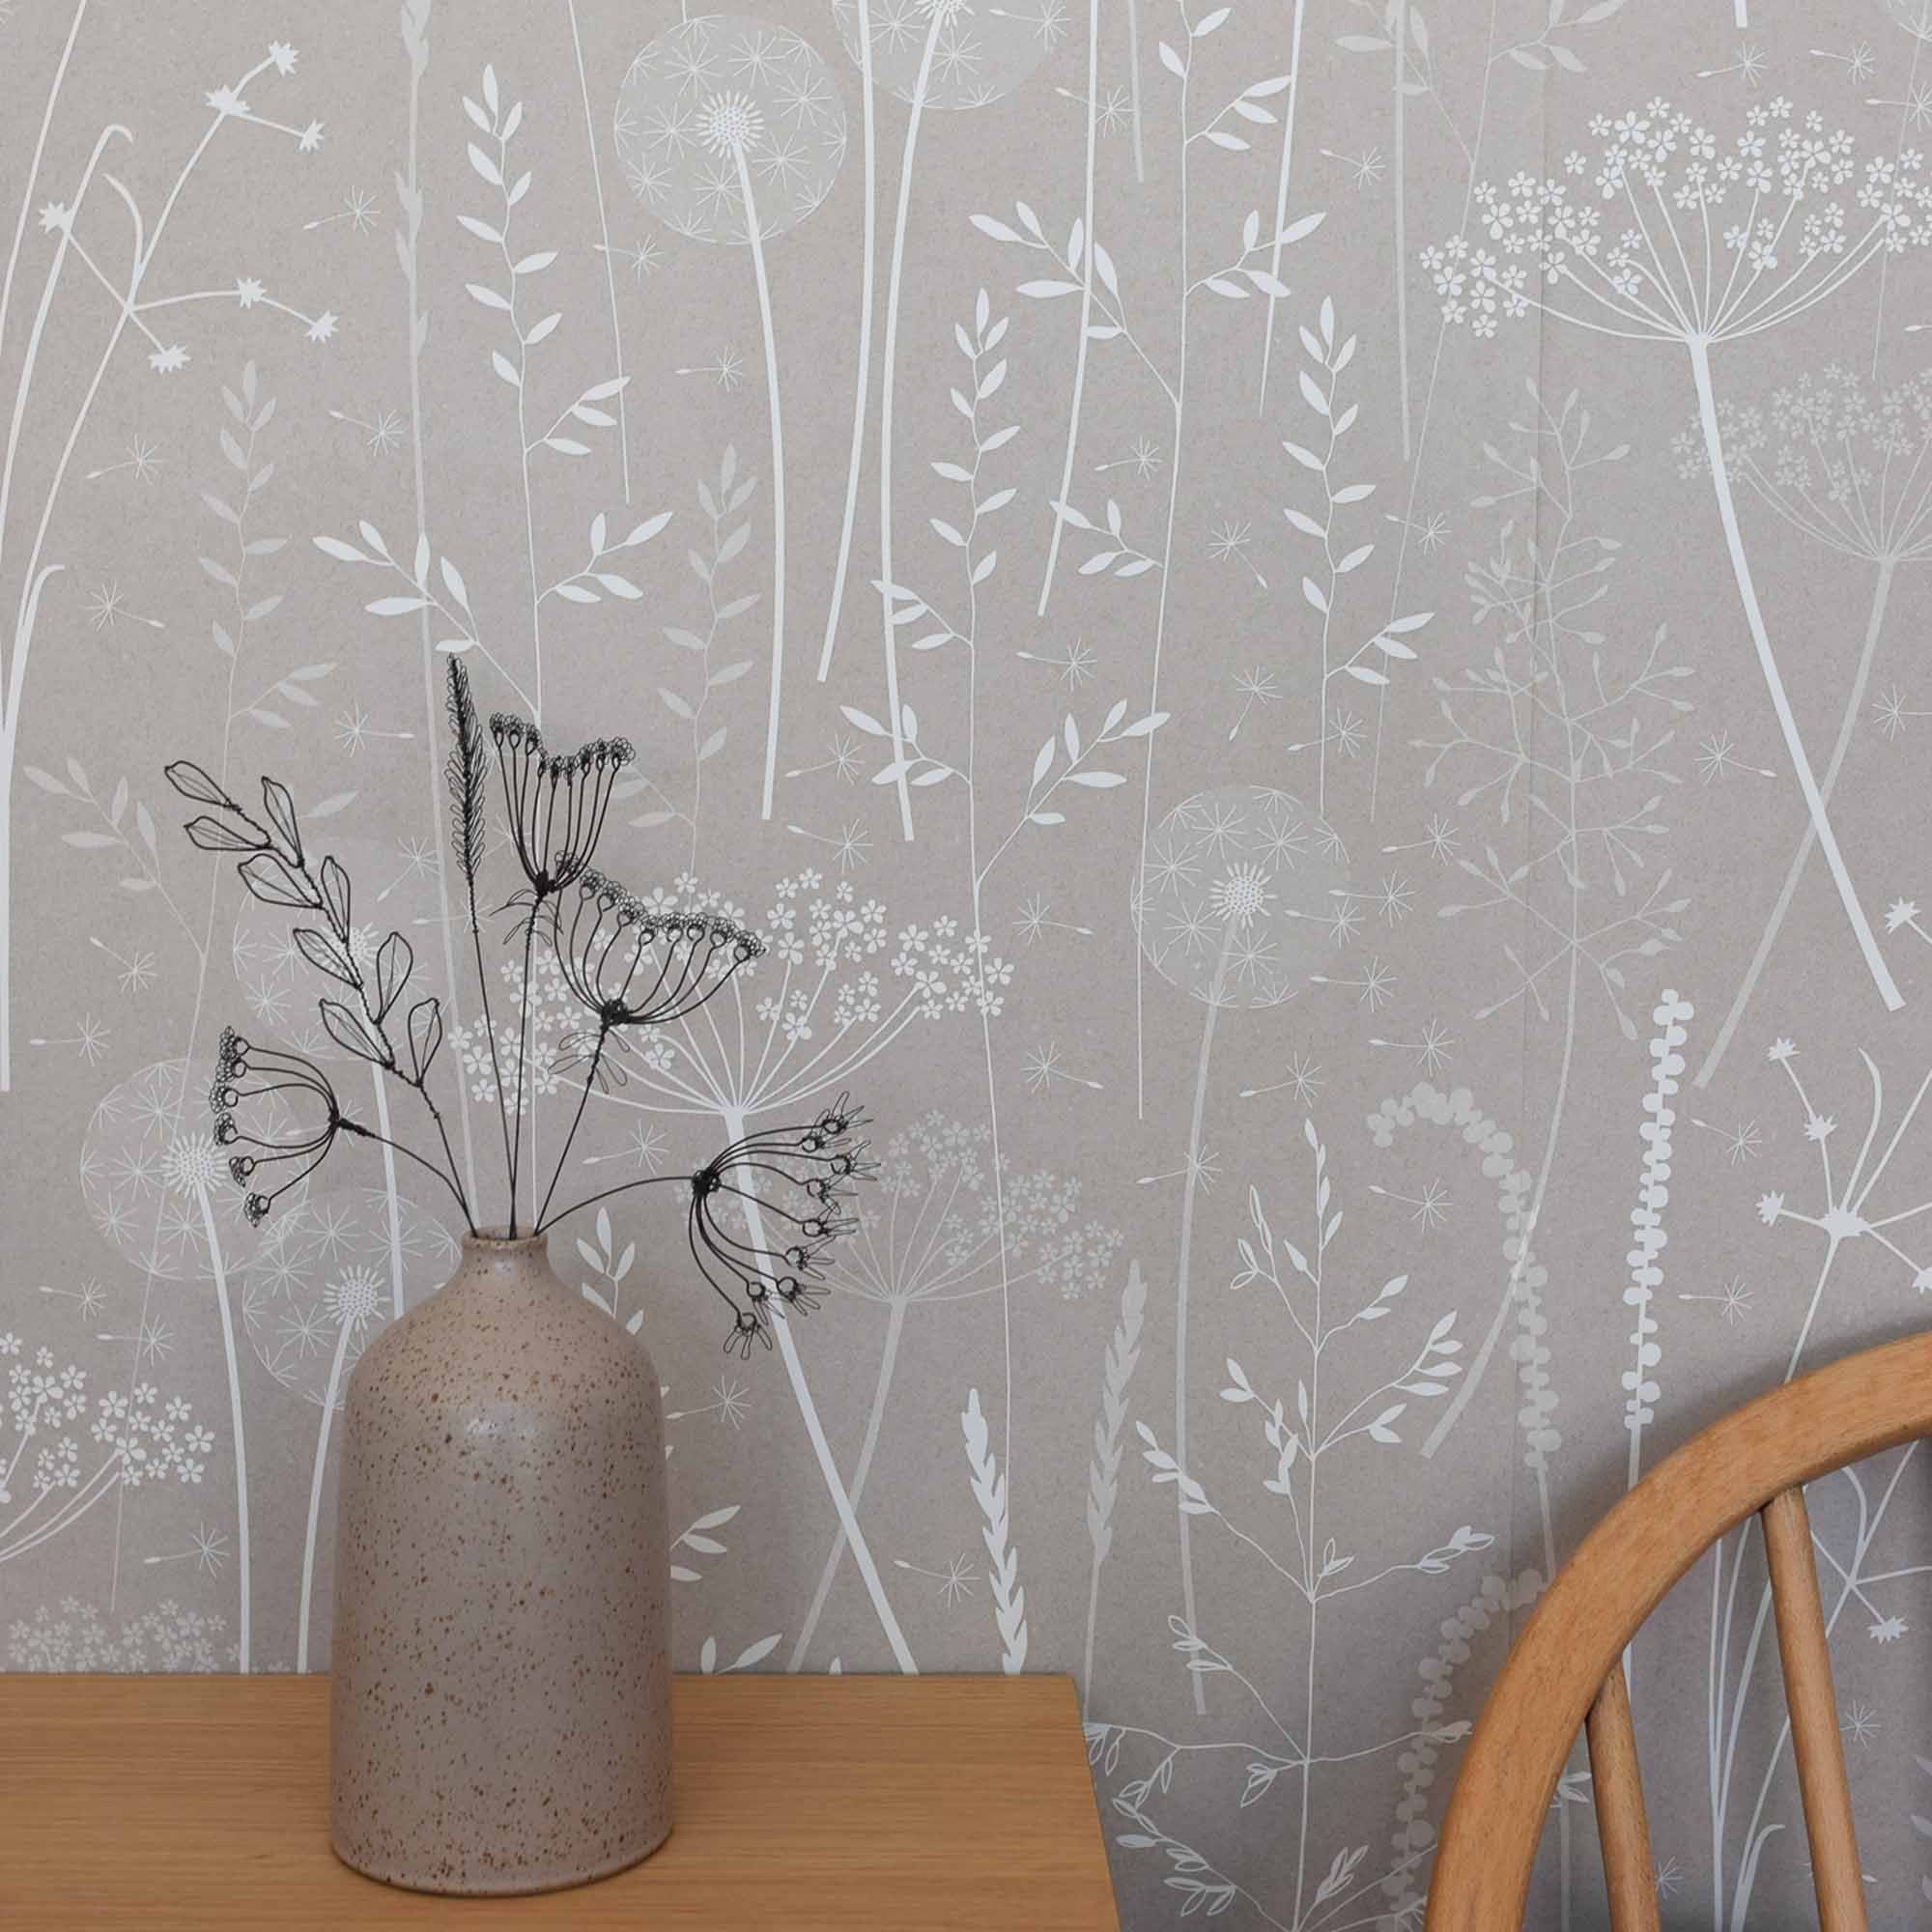 Cow parsley wire stems by Judith Brown Wallpaper by Hannah Nunn